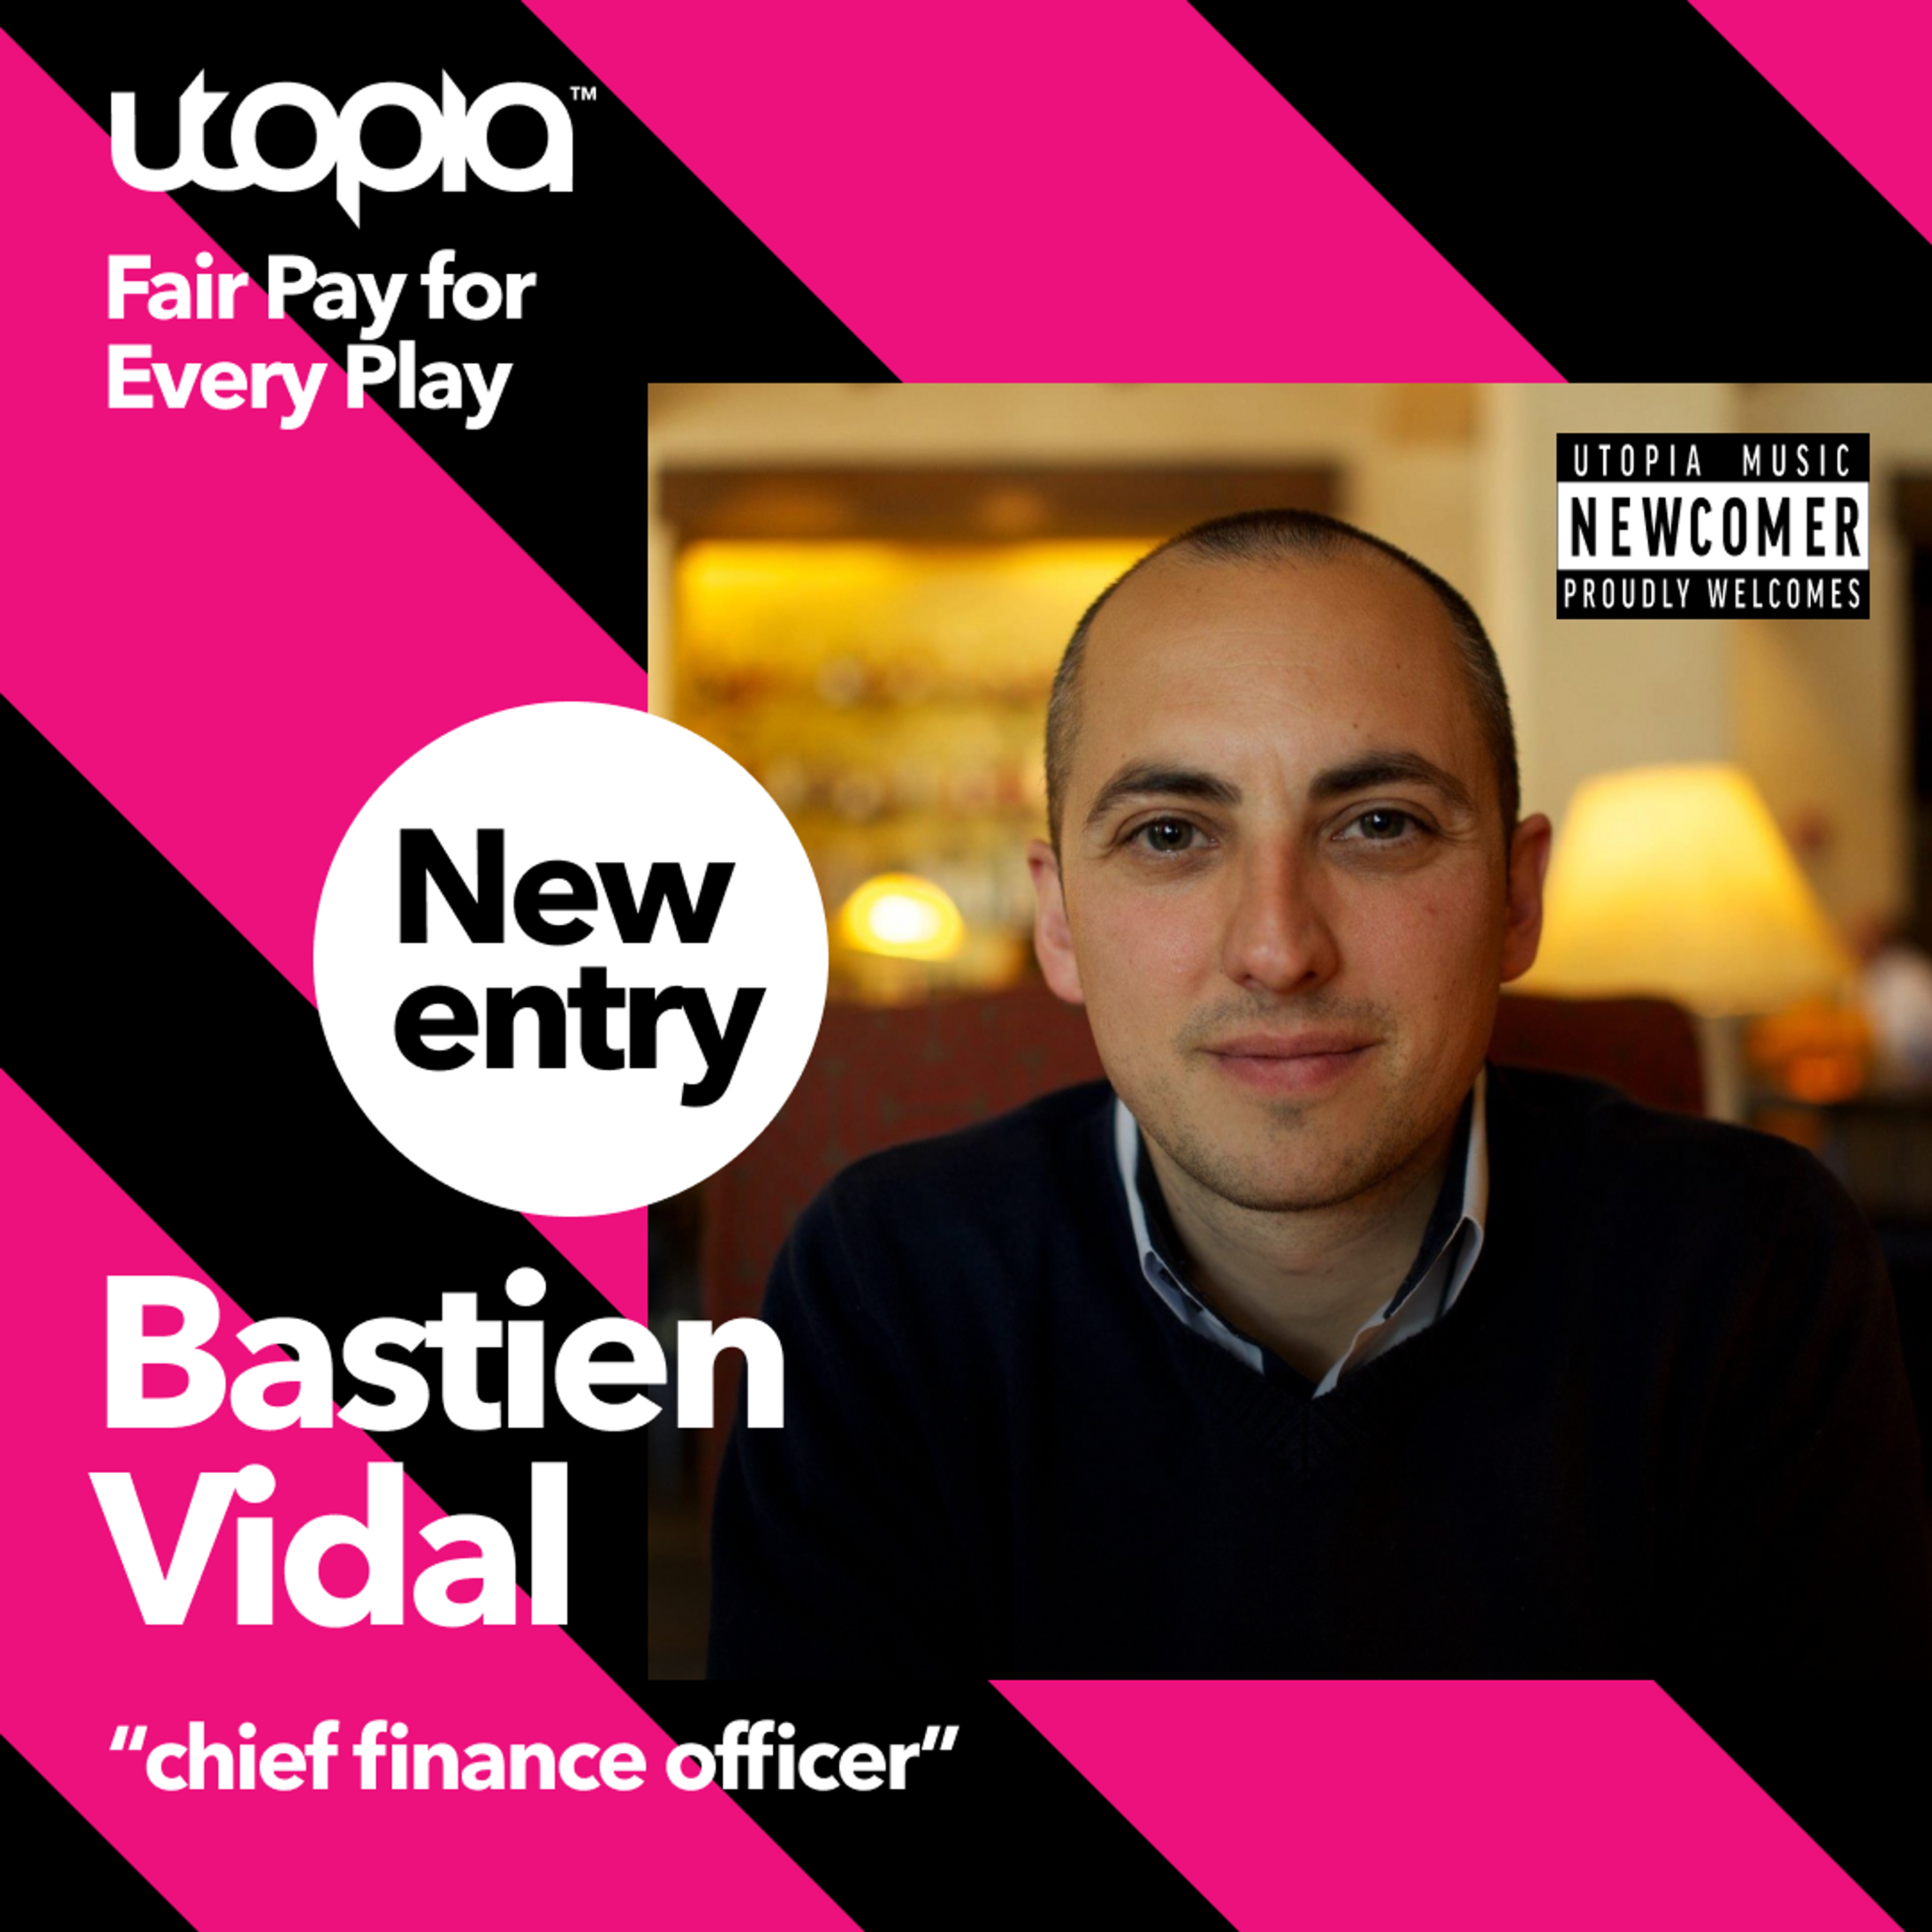 Card image for Utopia appoints Bastien Vidal as acting CFO and VP, Operational Finance